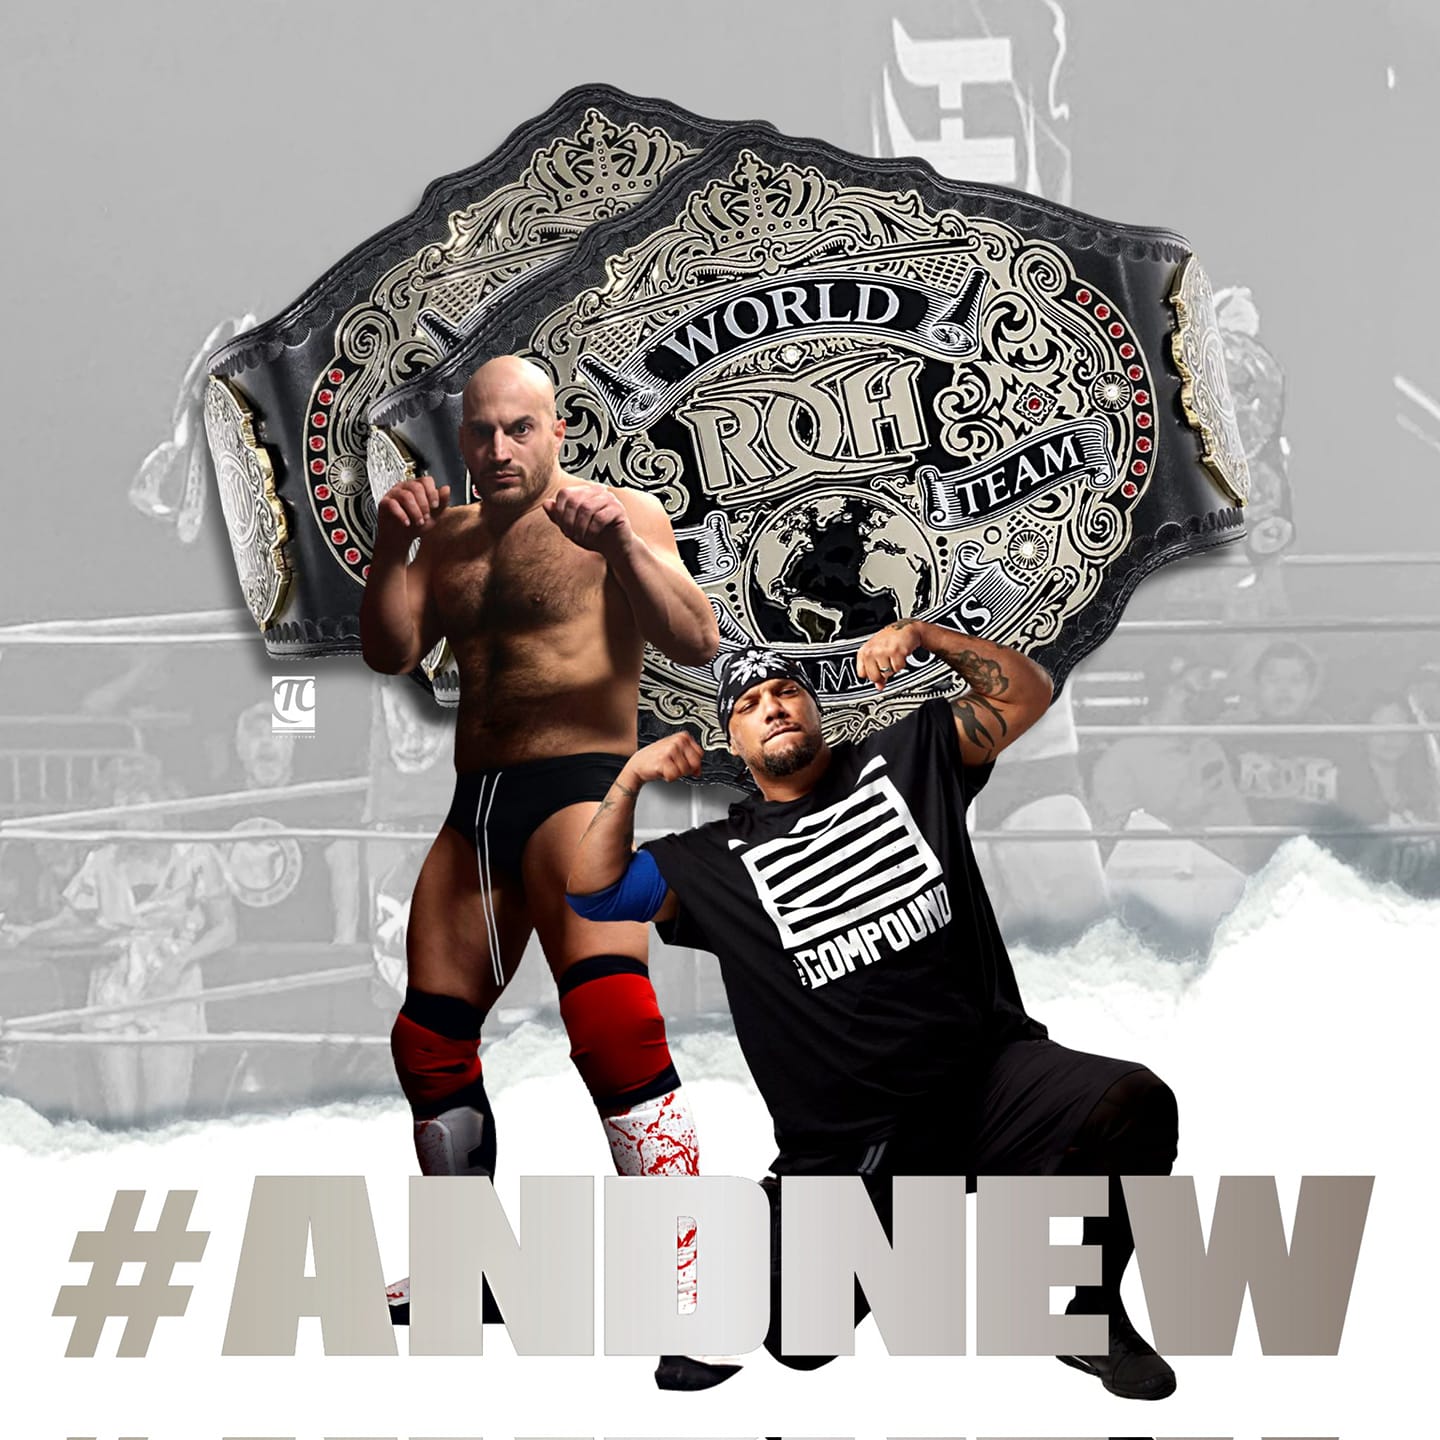 New Champions Crowned at ROH Best In The World 2021